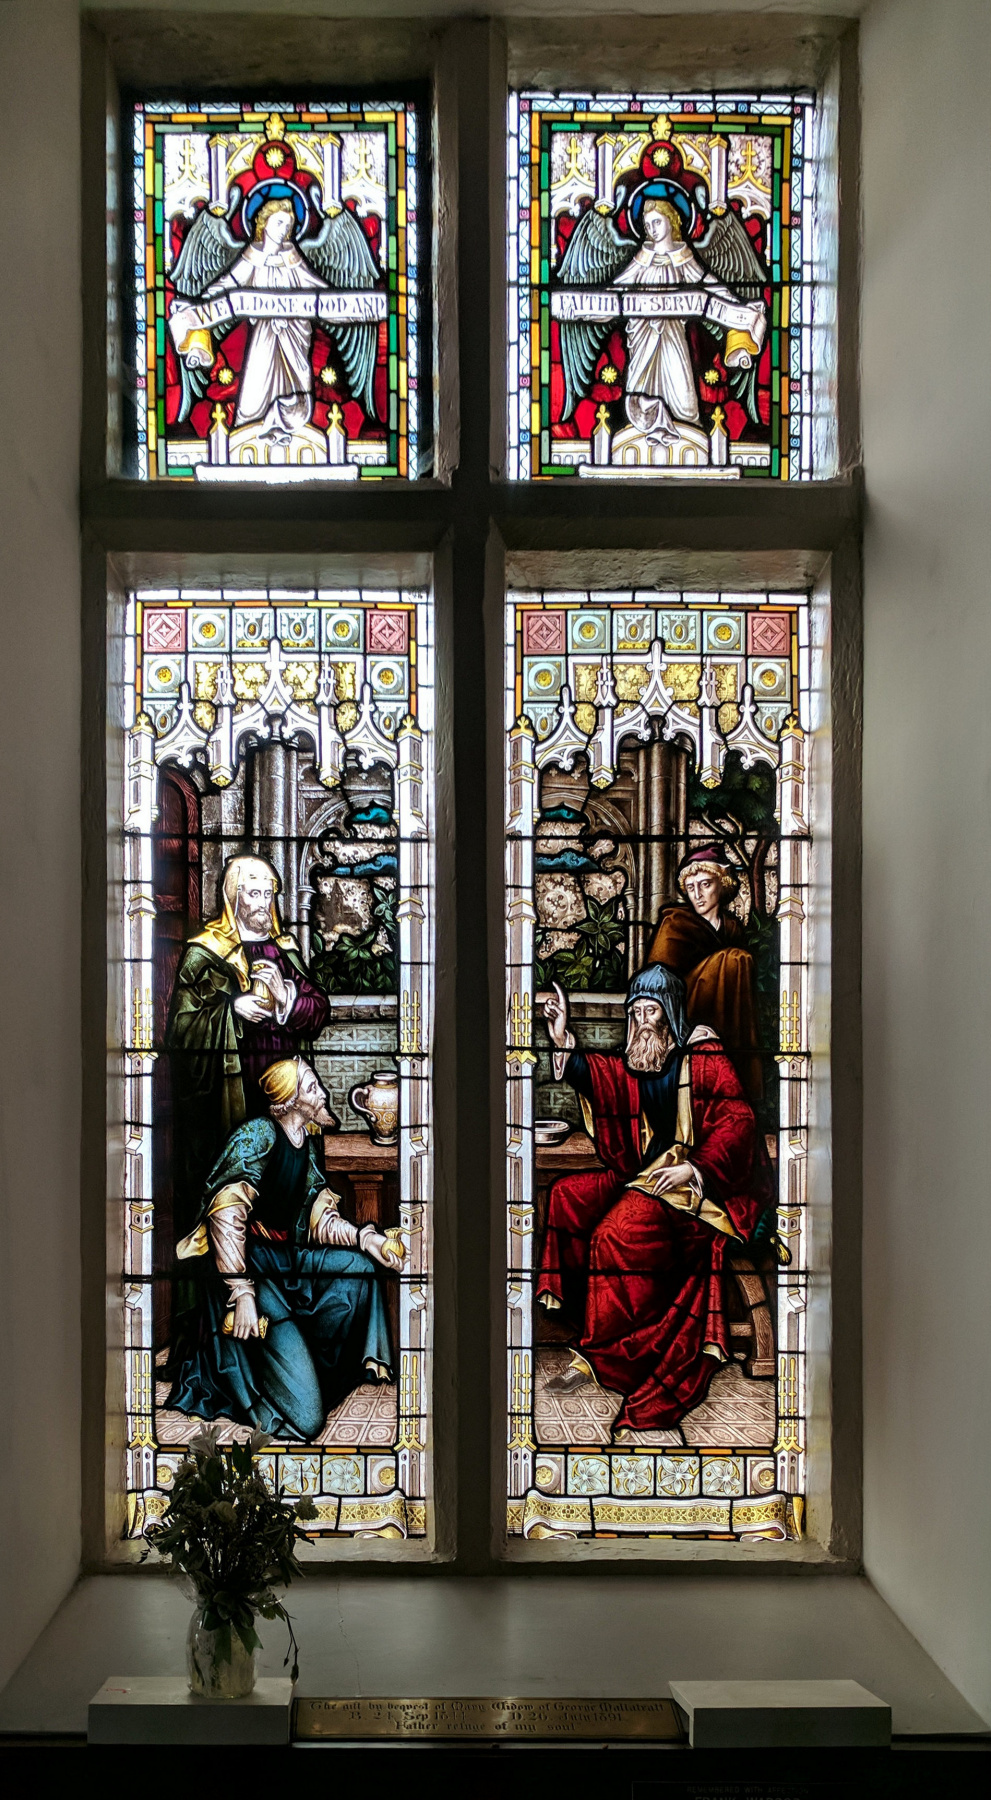 Stained glass window in the Old House of Assembly, Mansfield, Nottinghamshire